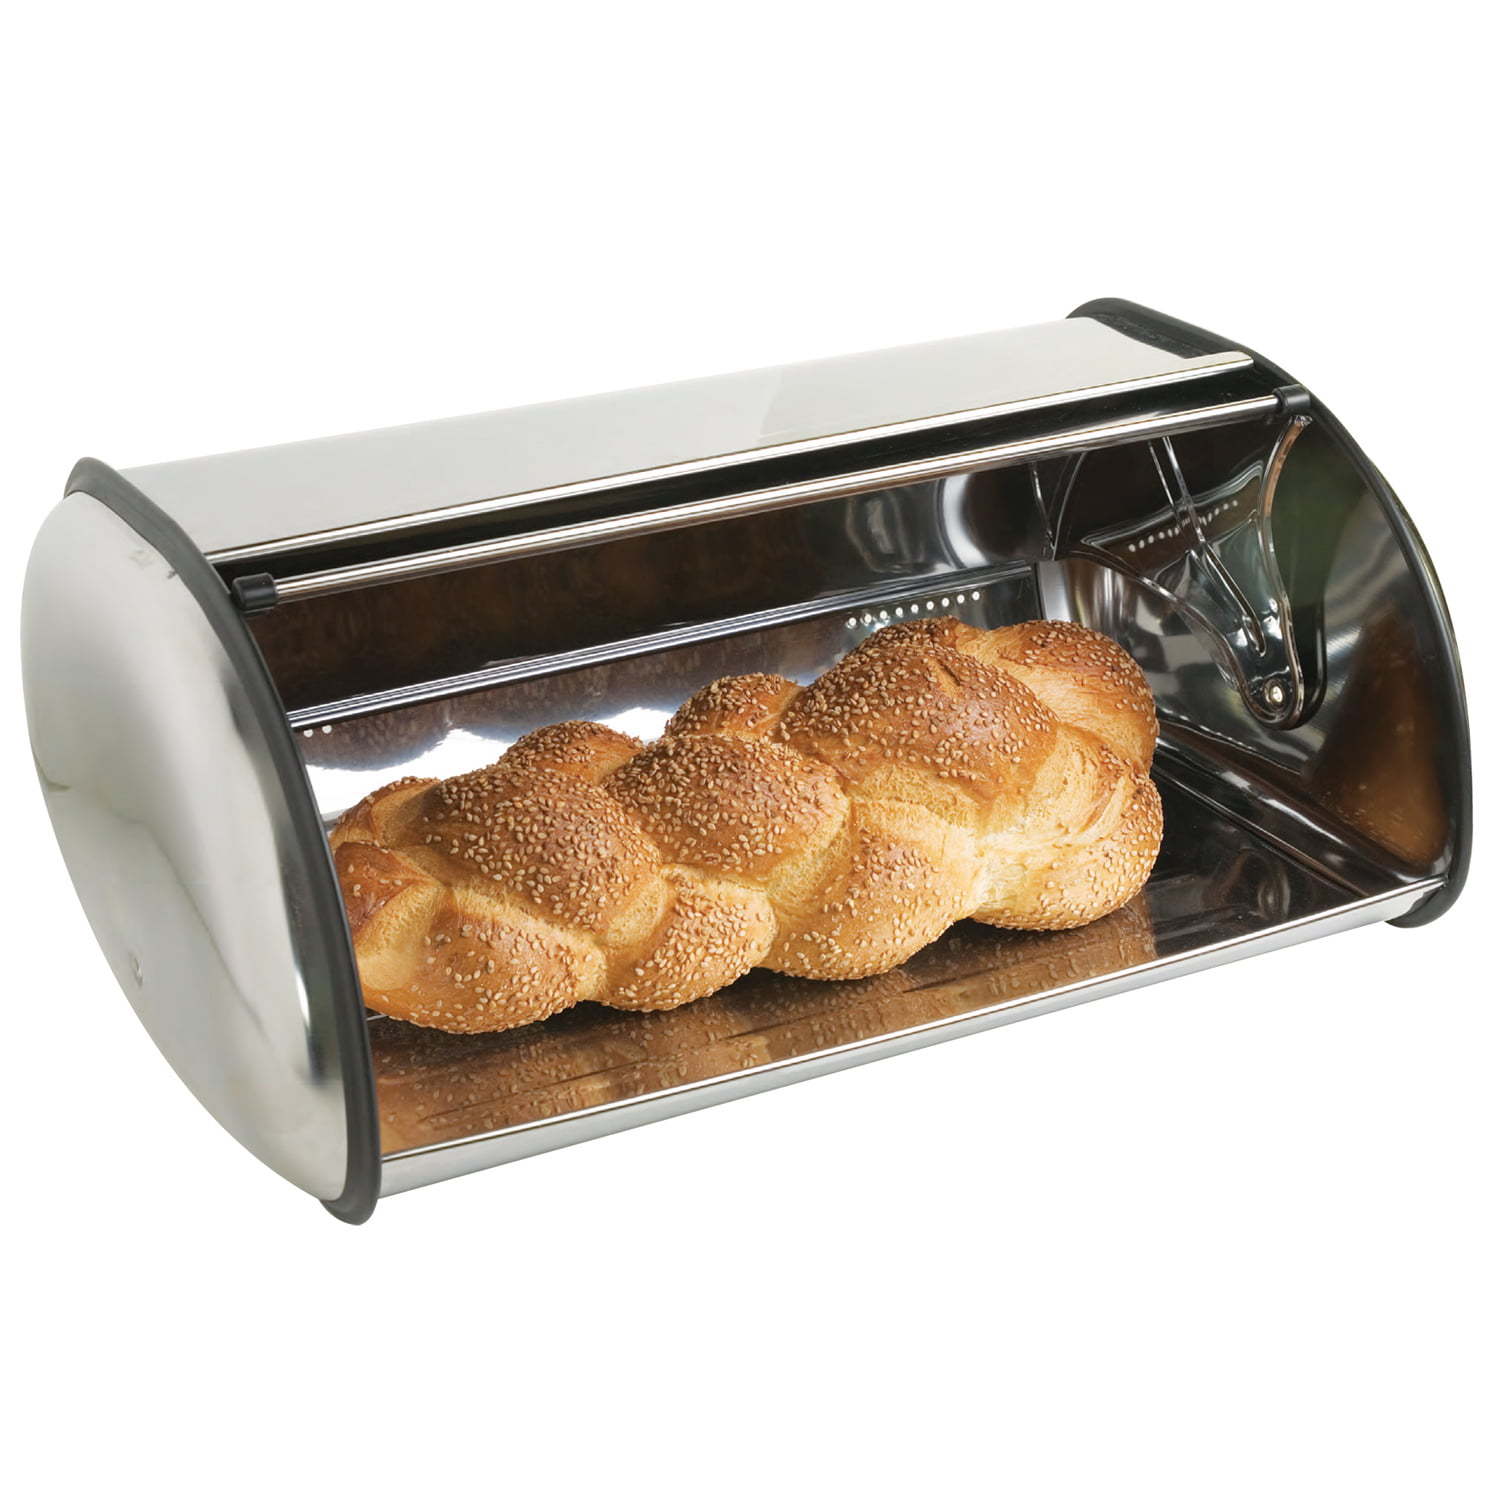 Home Basics Sleek Roll Top Stainless Steel Kitchen Bread Box Storage Home-it Stainless Steel Bread Box For Kitchen